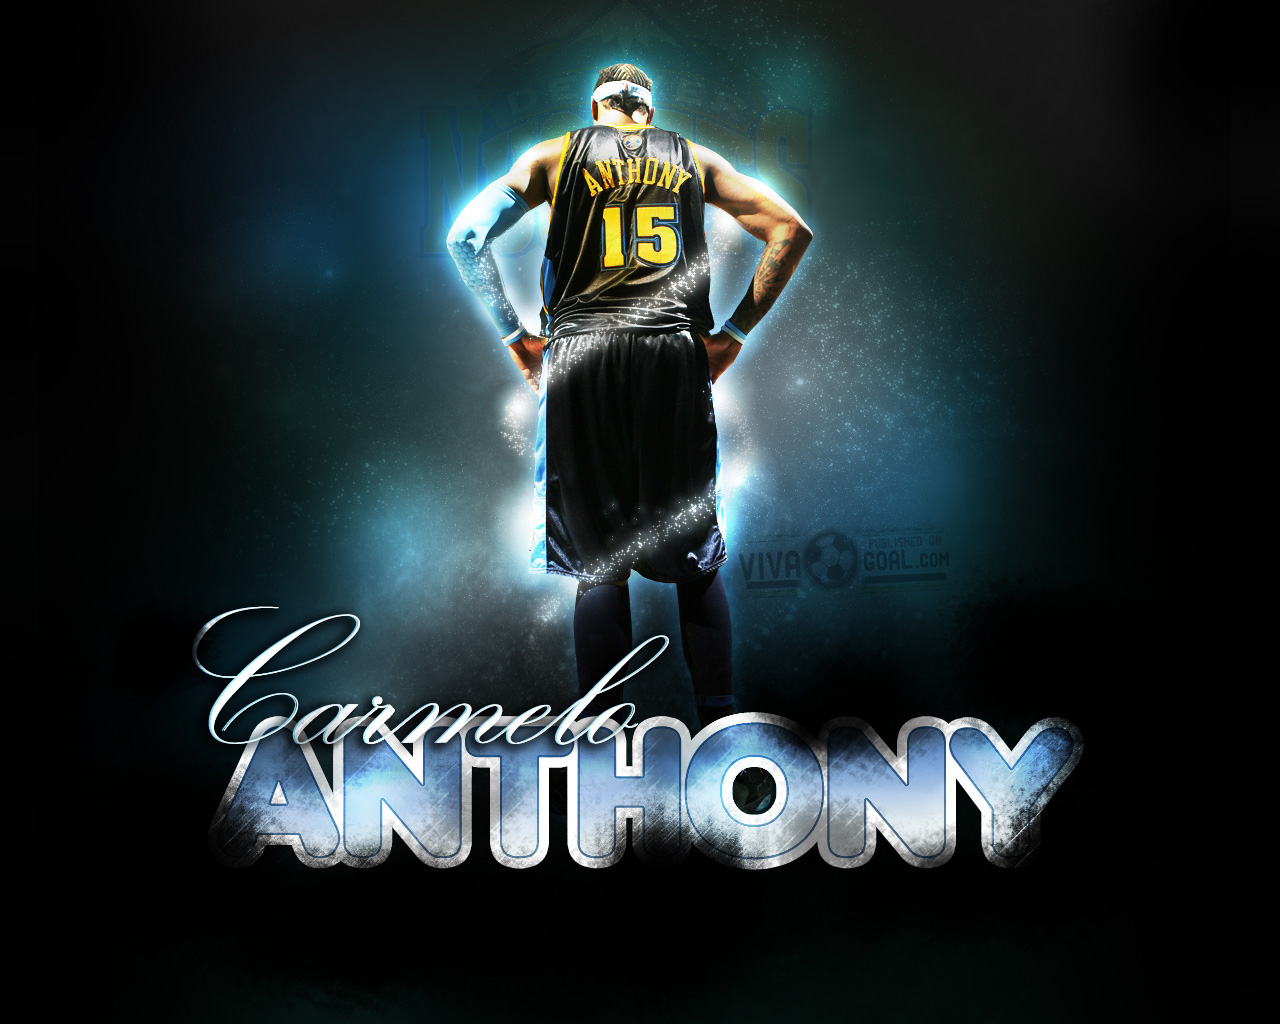 Carmelo Anthony Basketball Wallpapers Carmelo Anthony 1280x1024